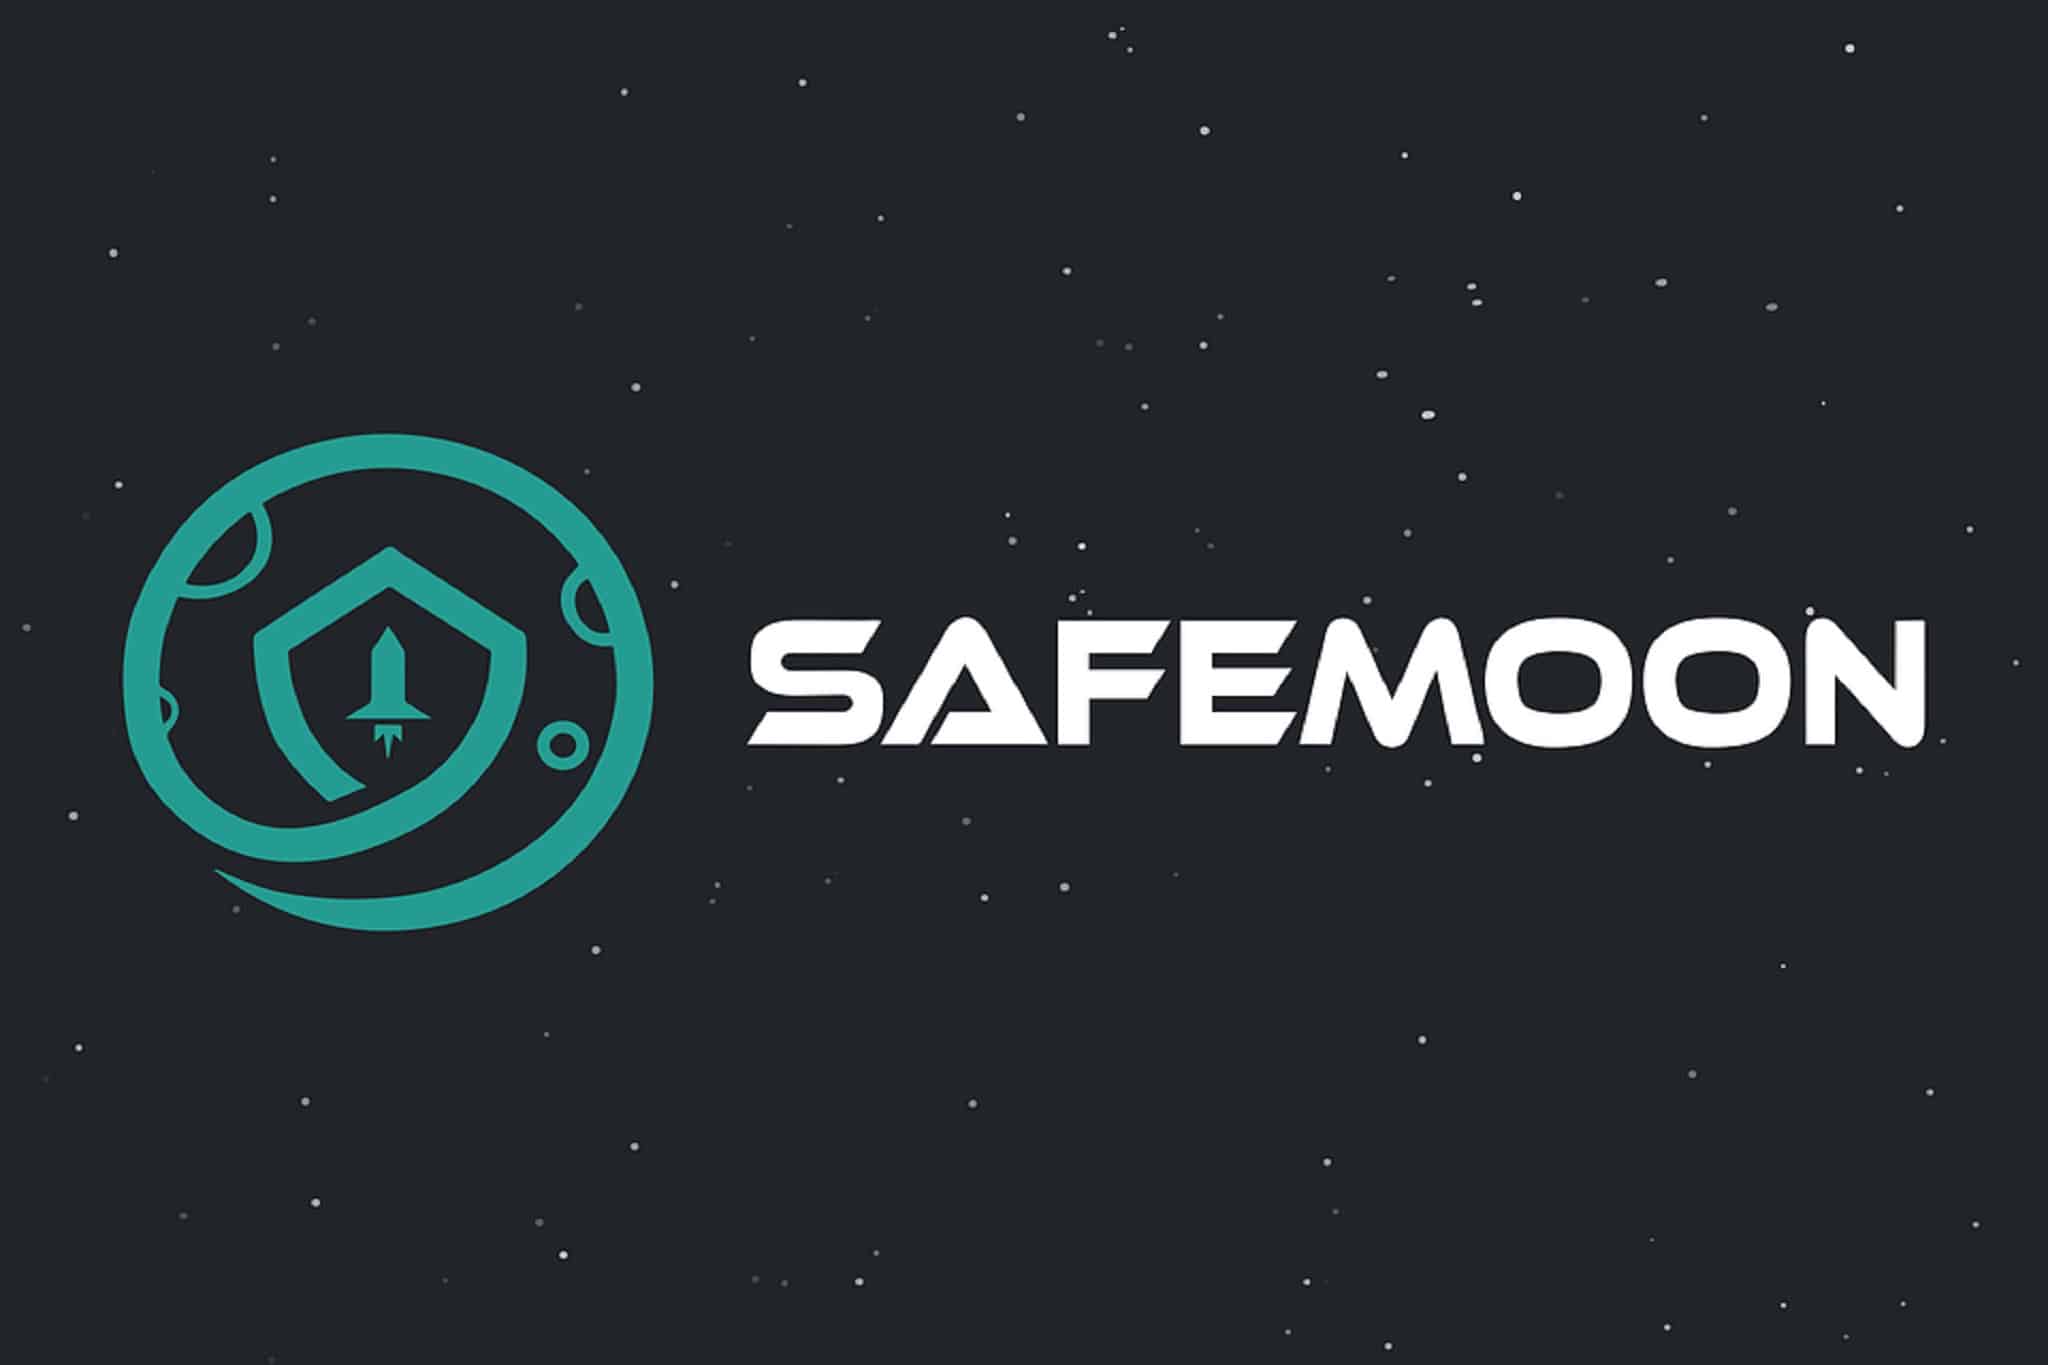 US Government Arrests Founders of SafeMoon Crypto Token